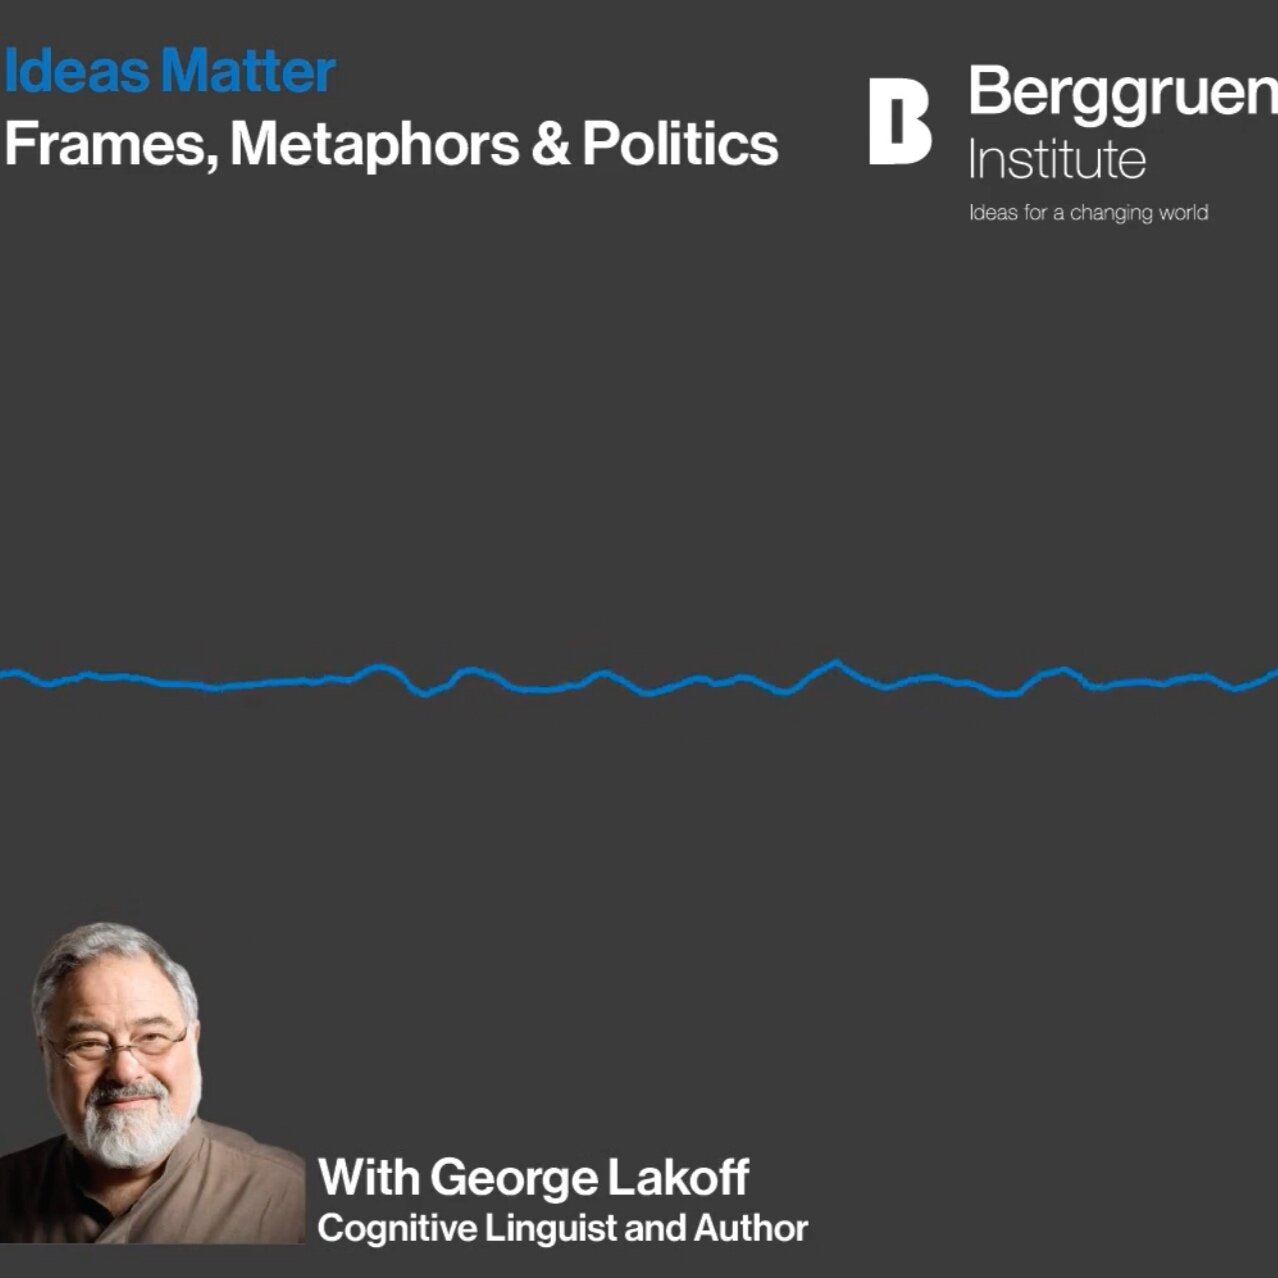 Interview with Professor George Lakoff for Berggruen Institute "Ideas Matter" Podcast